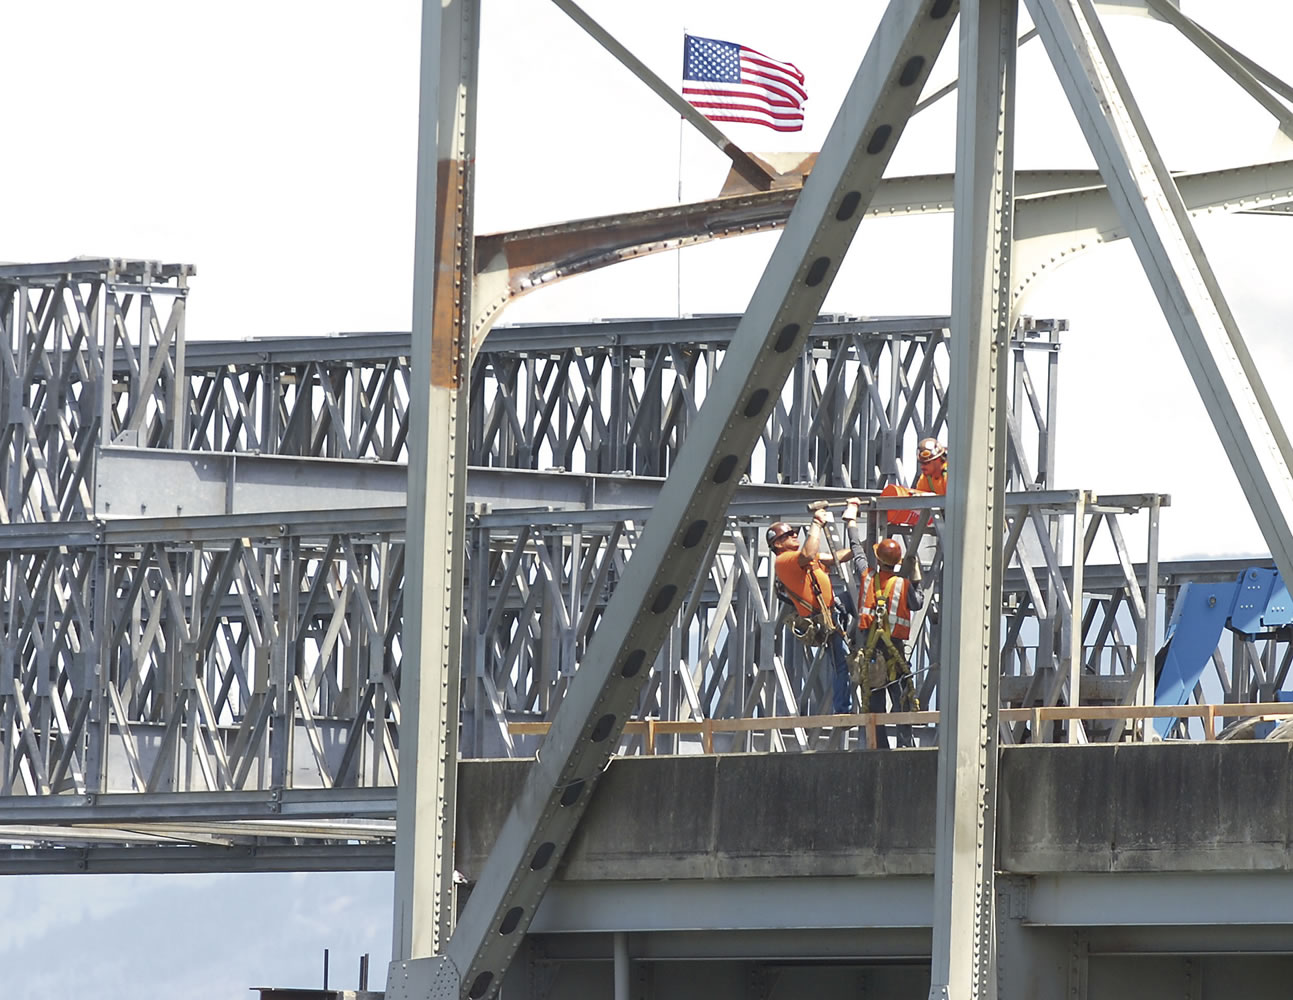 Workers disassemble the front of the temporary bridge extension Monday over the Skagit River on Interstate 5 on the southern end of the span.